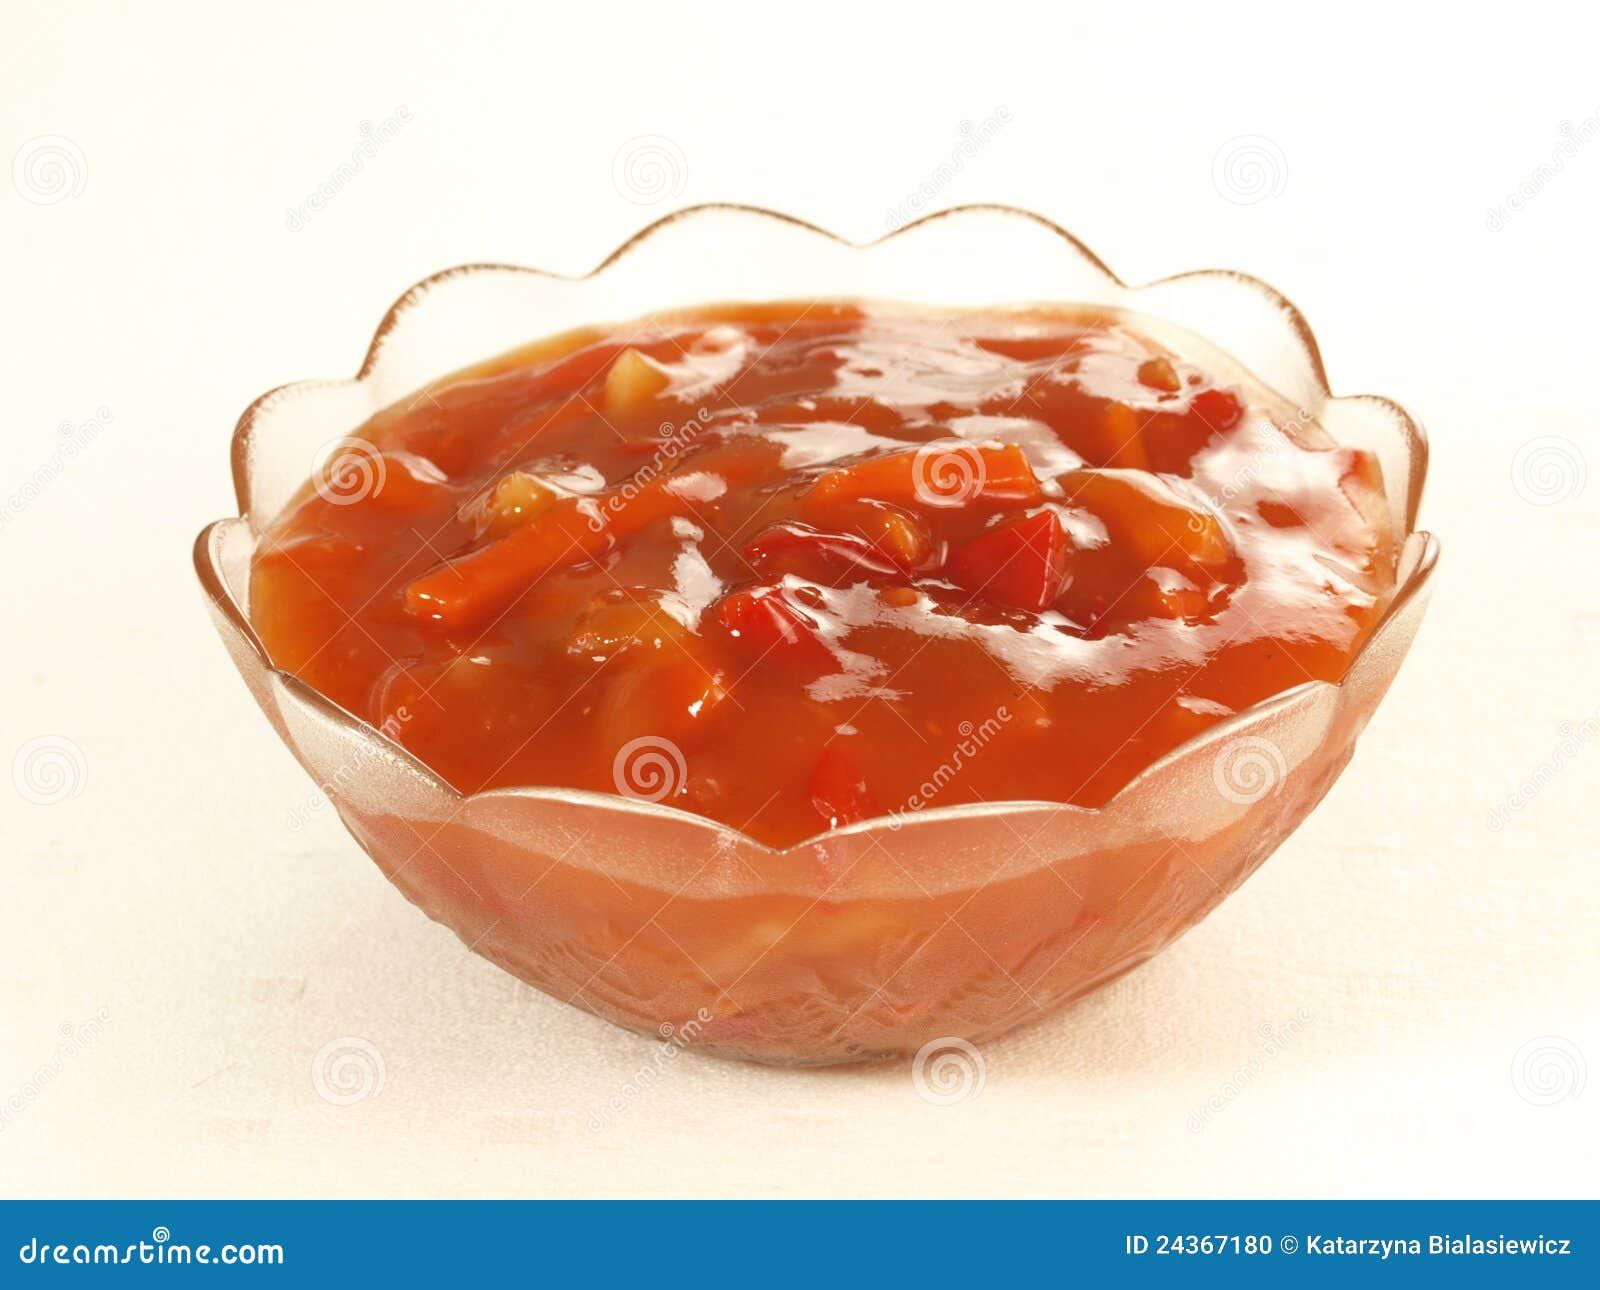 sweet and sour sauce, 